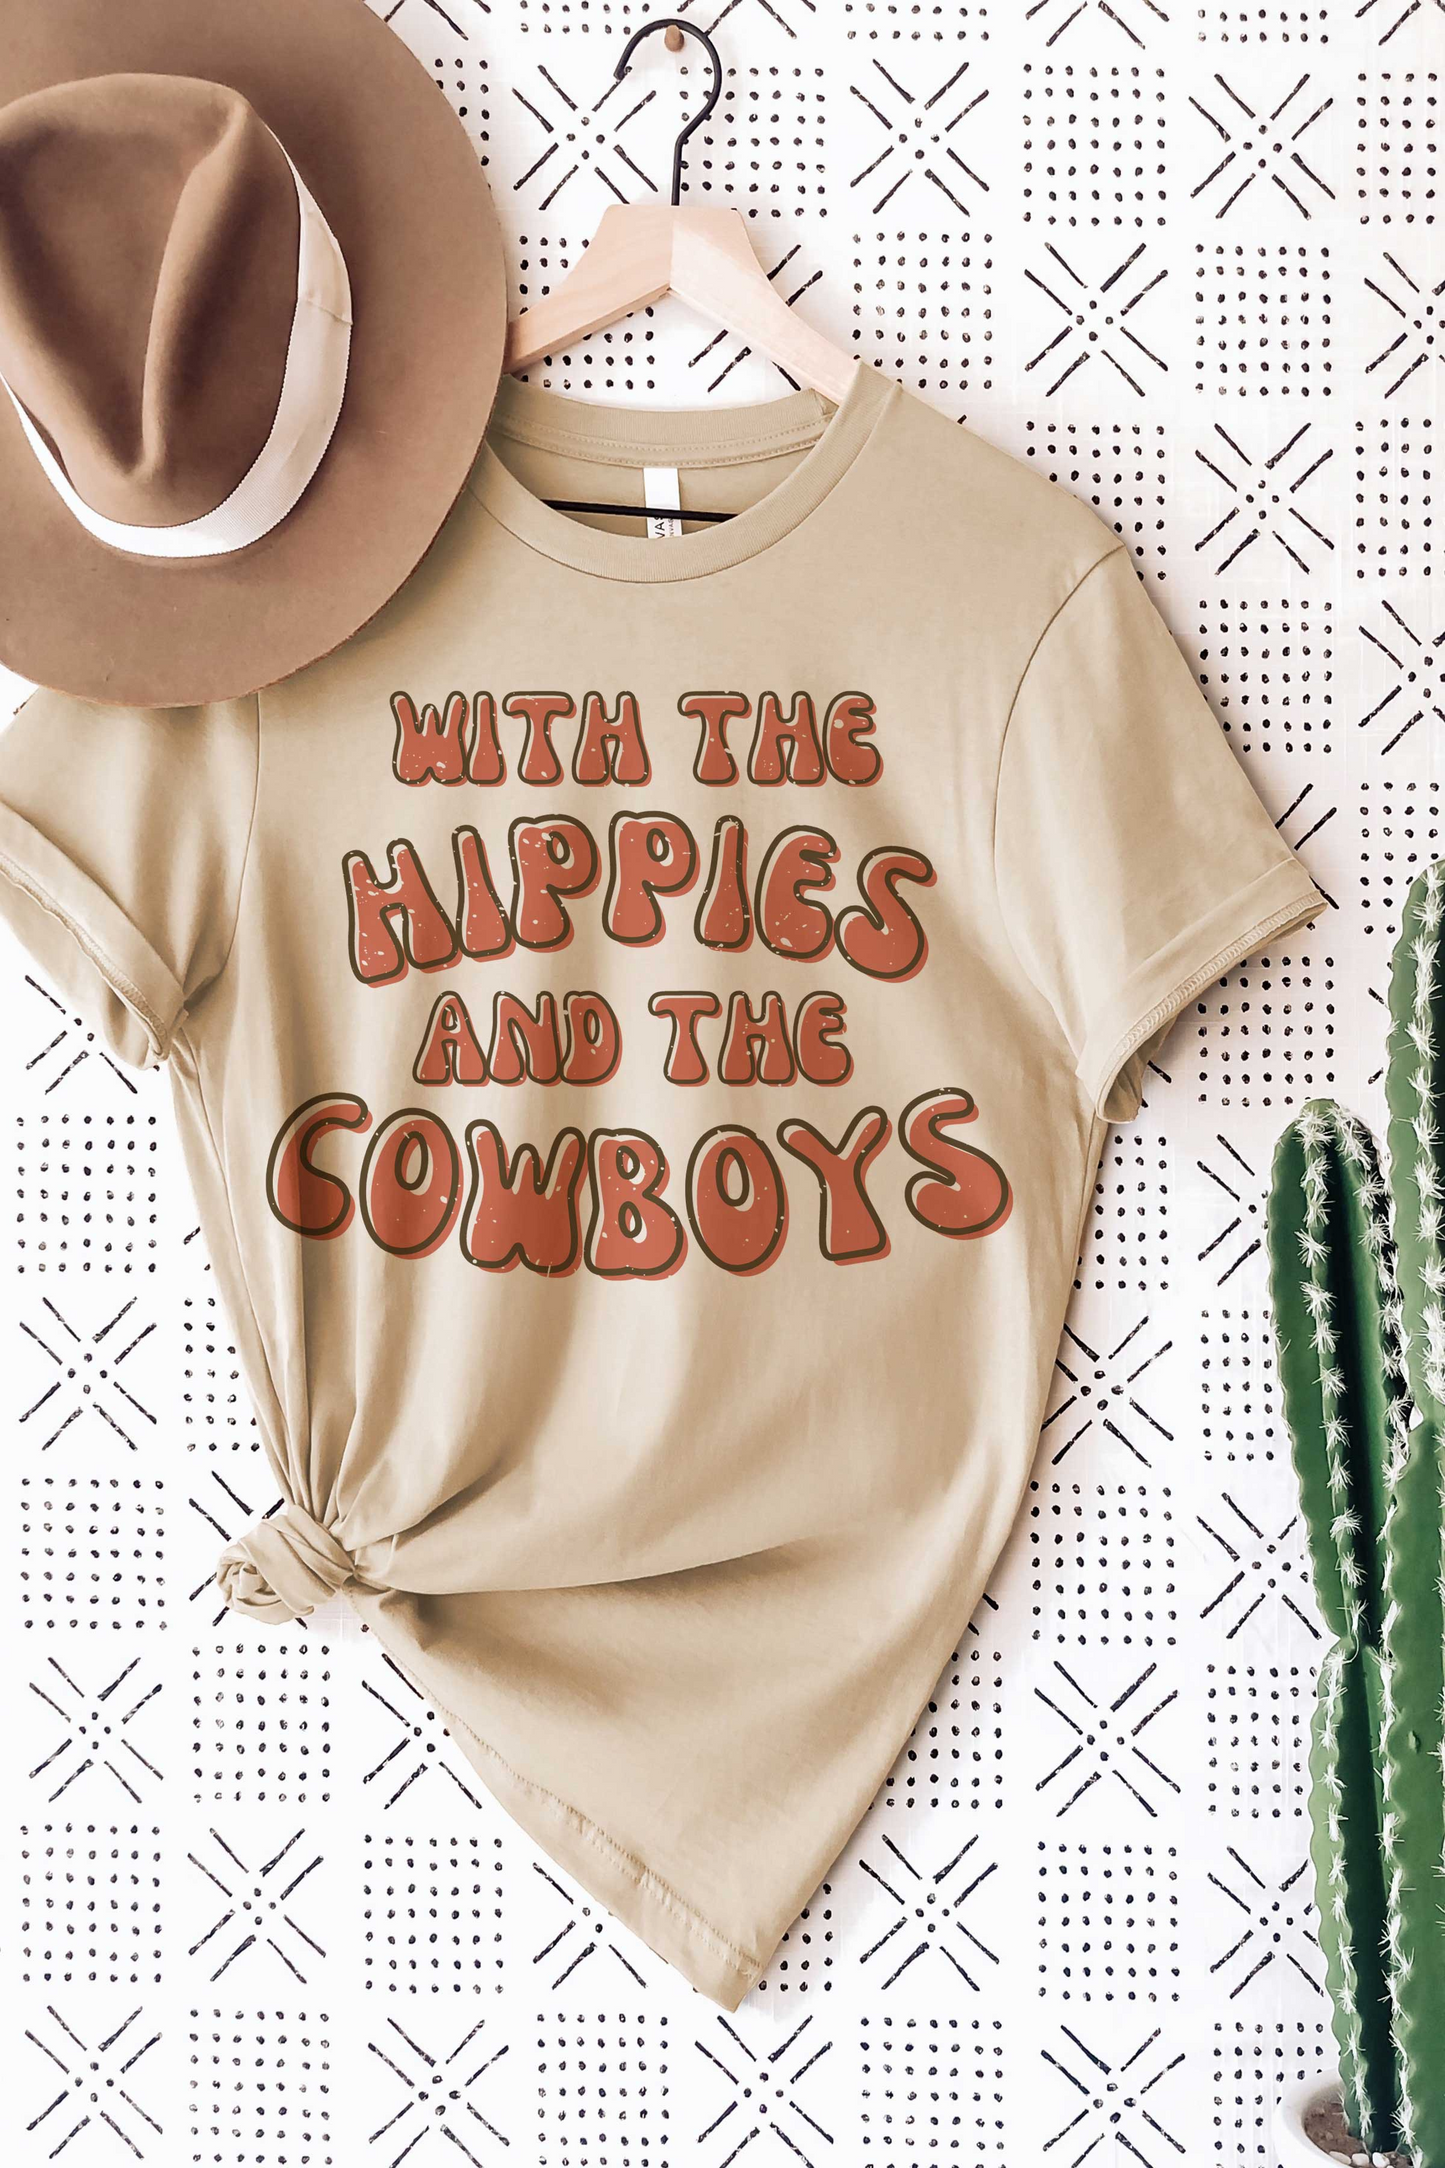 Plus Size - With the Hippies and the Cowboys Tee